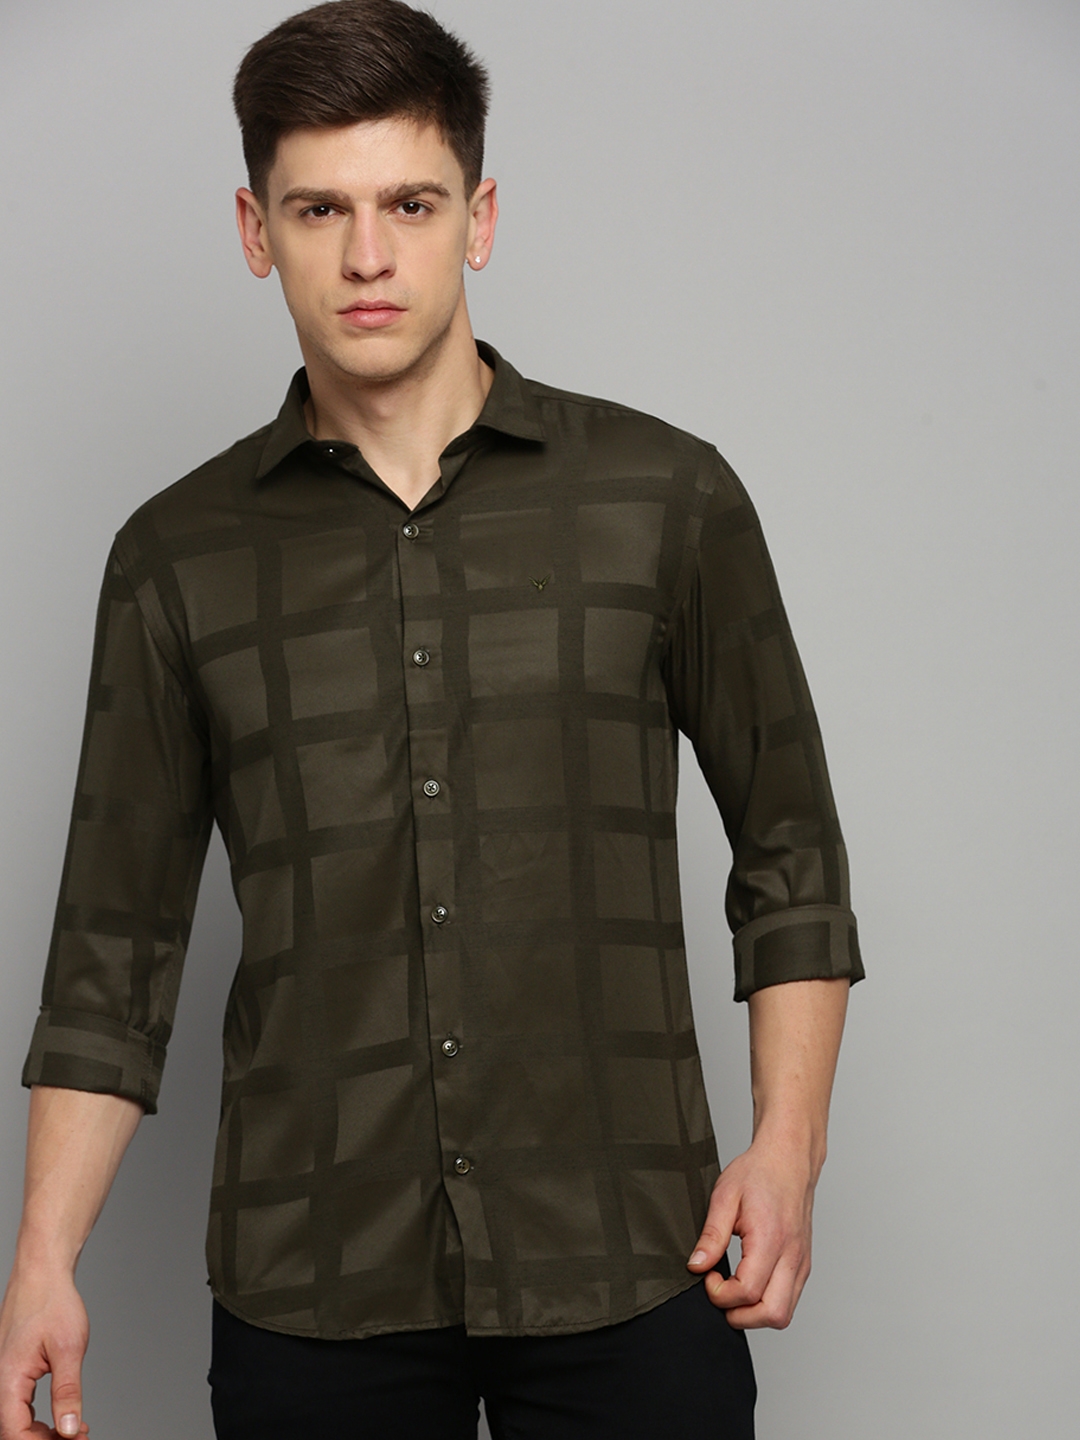 Showoff | SHOWOFF Men's Spread Collar Solid Olive Classic Shirt 1